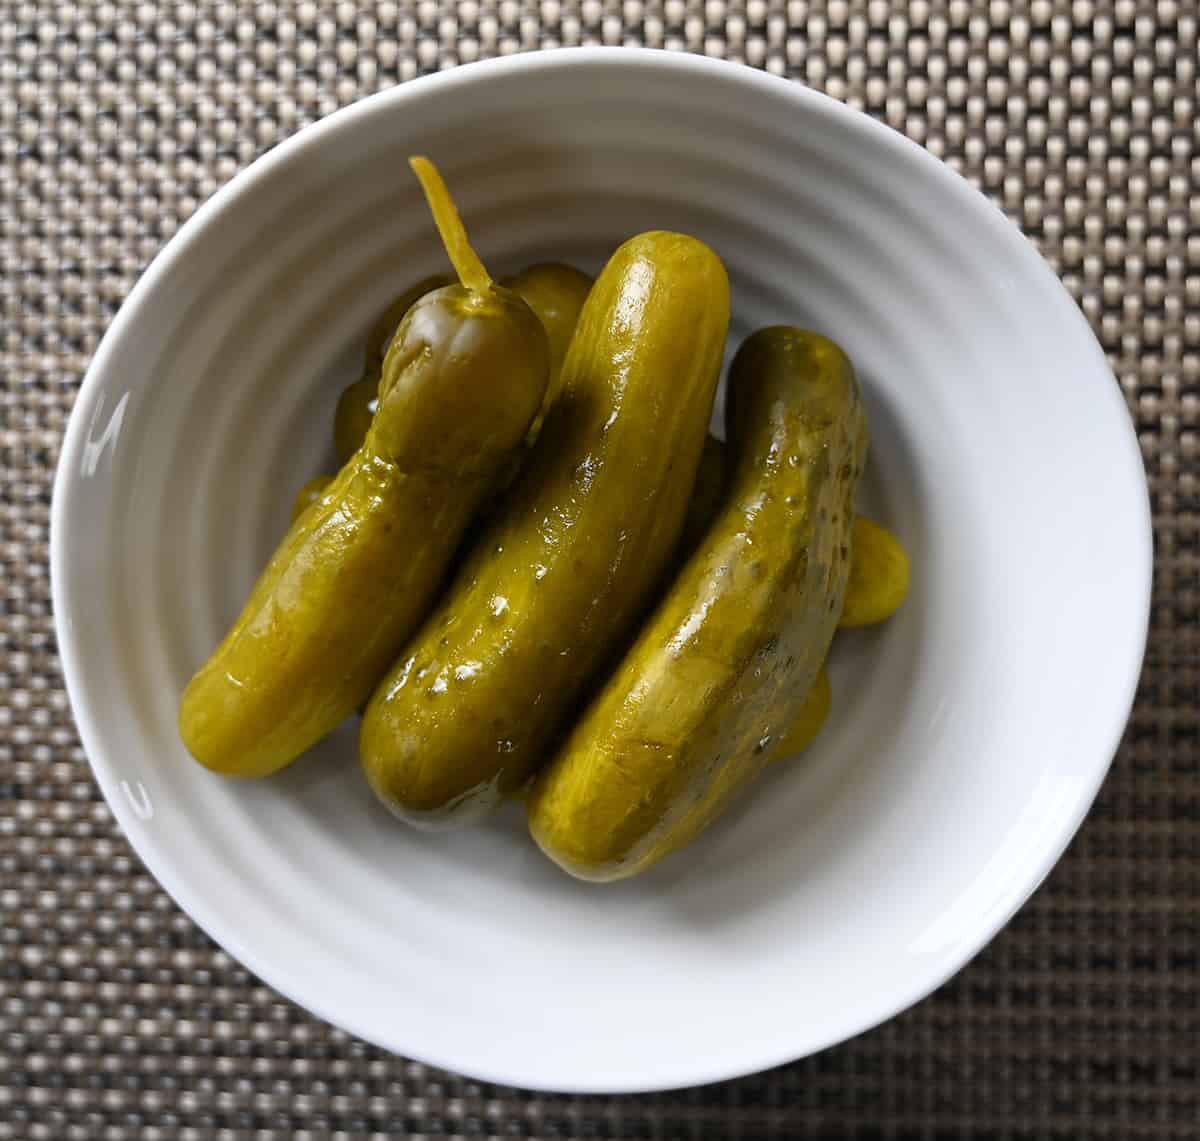 Top down image of a bowl of baby dill pickles.